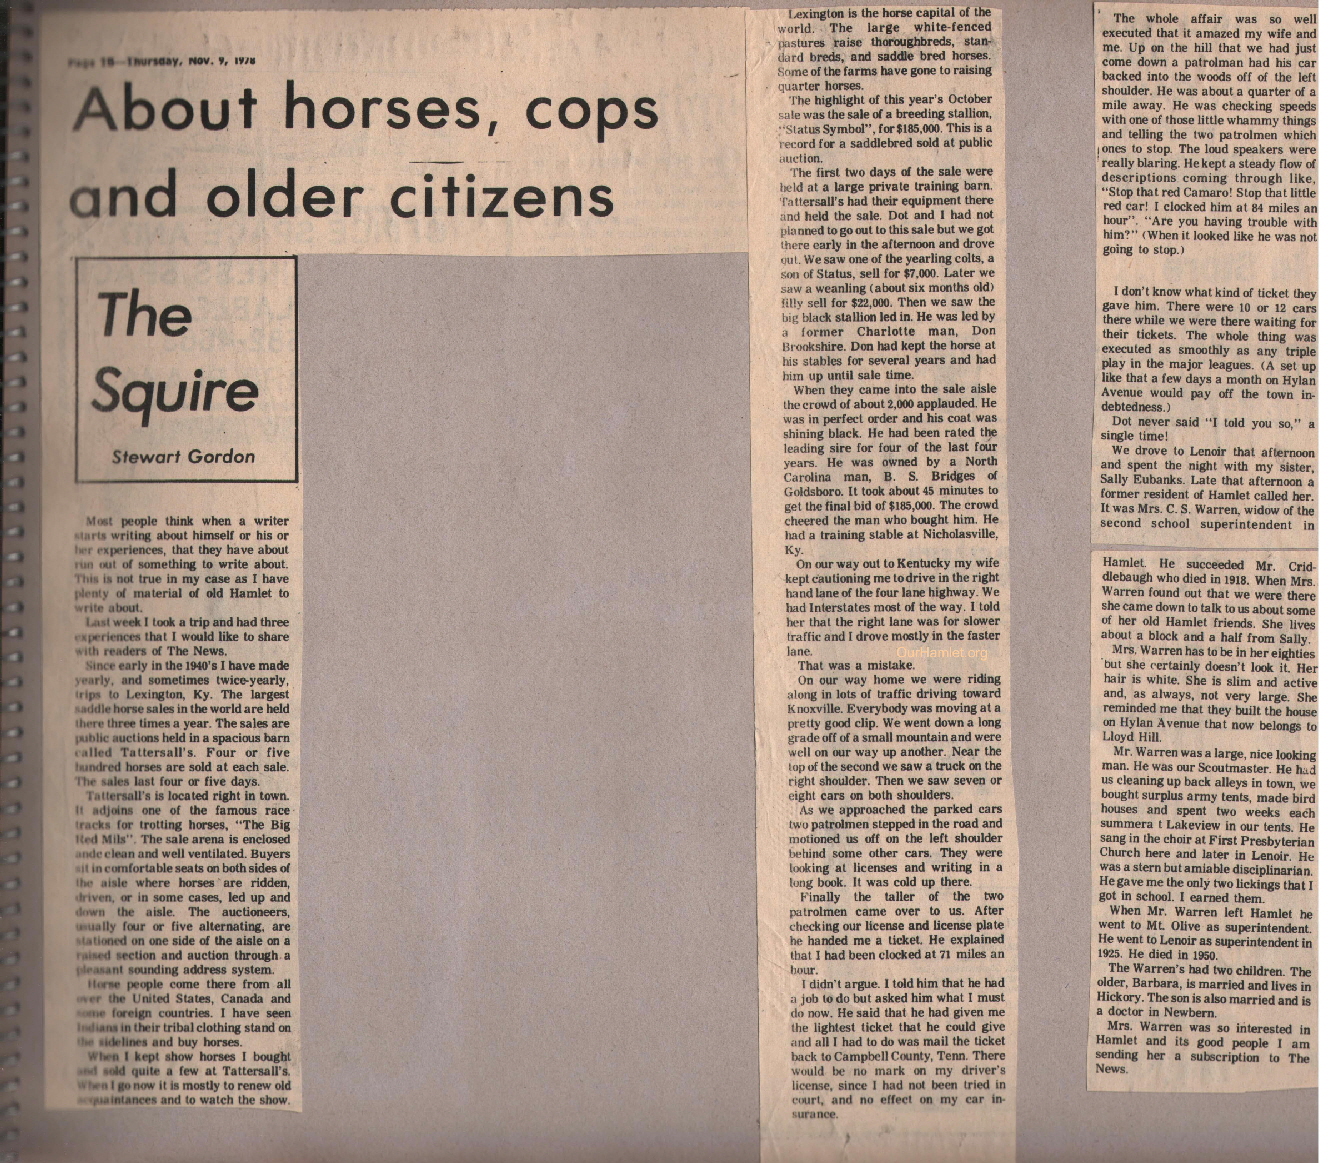 The Squire - About horses, cops and older citizens a OH